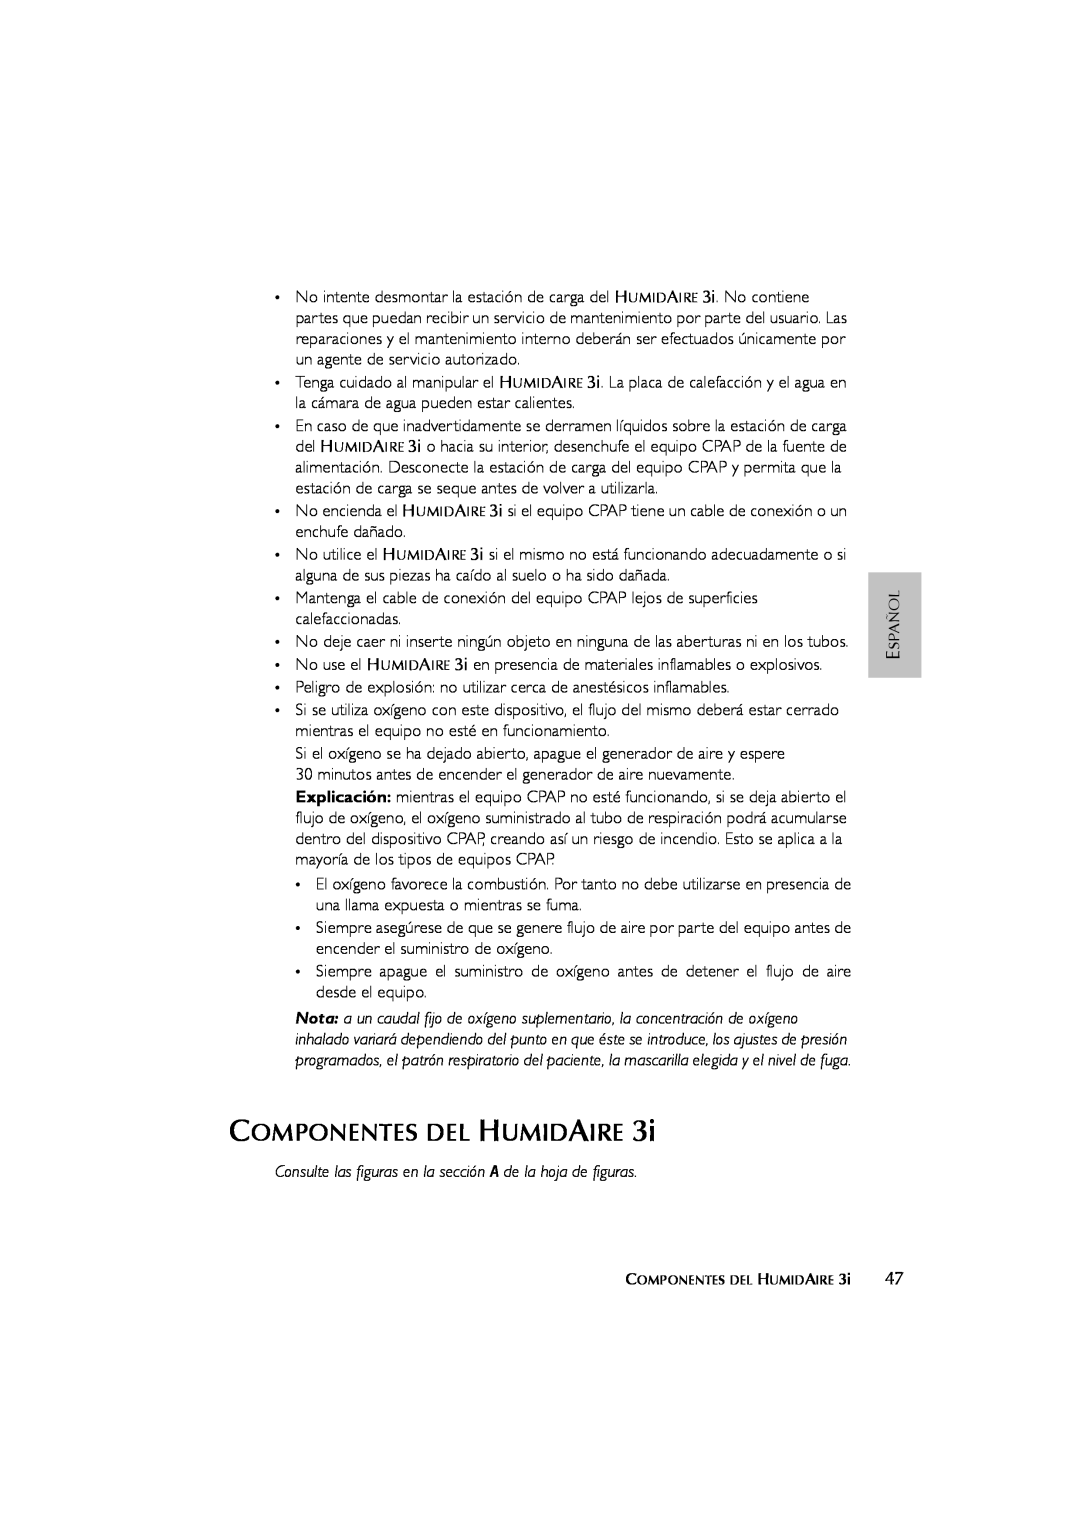 ResMed 3I user manual Componentes Del Humidaire 